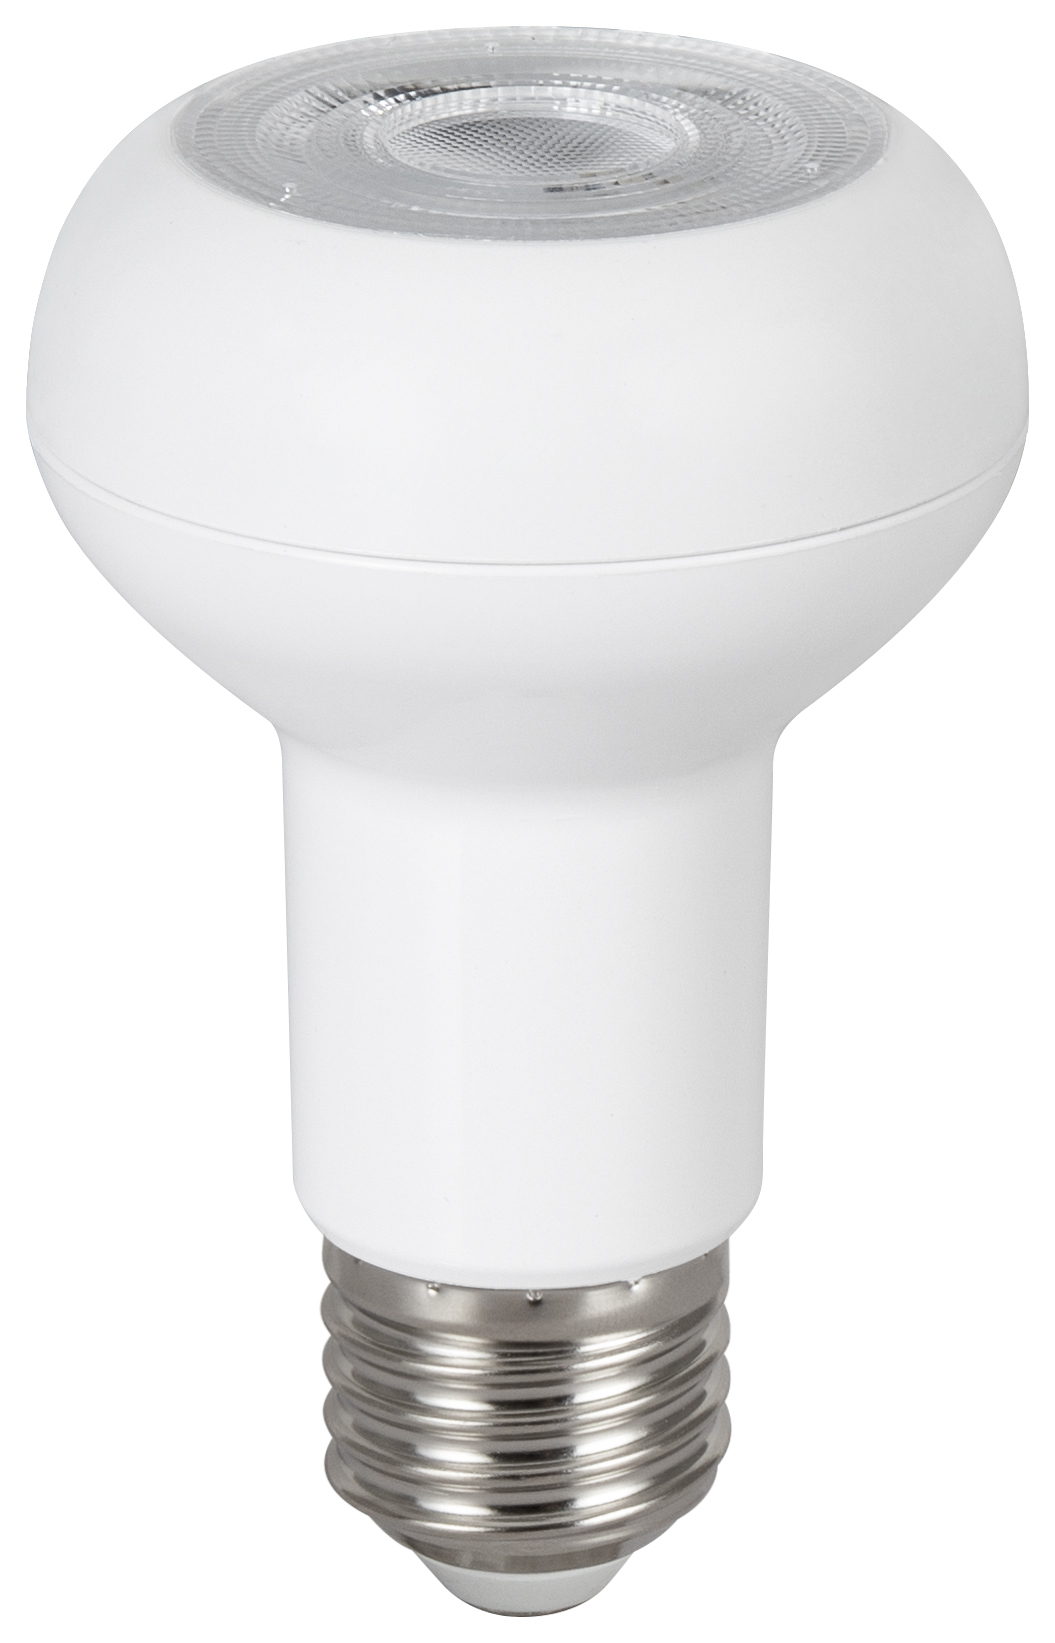 Image of Wickes Non-Dimmable R63 Frosted Reflector LED E27 3.5W Light Bulb